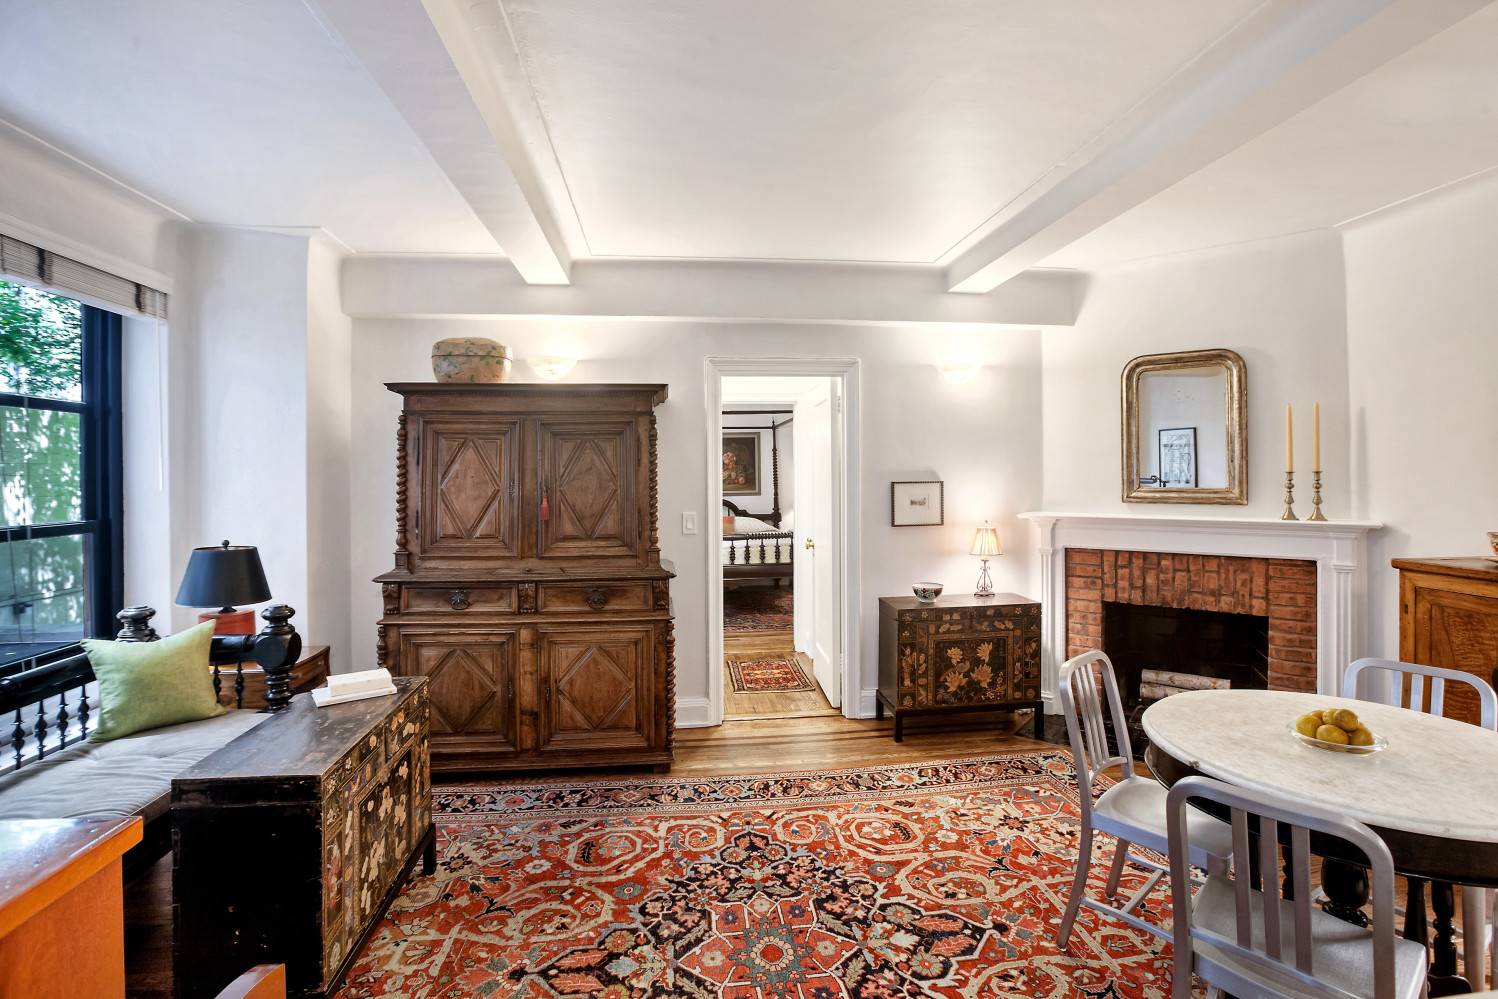 An elegant and charming one bedroom apartment at Gramercy House, the highly sought after Art Deco Coop on East 22nd Street, a block and a half from Gramercy Park and ...